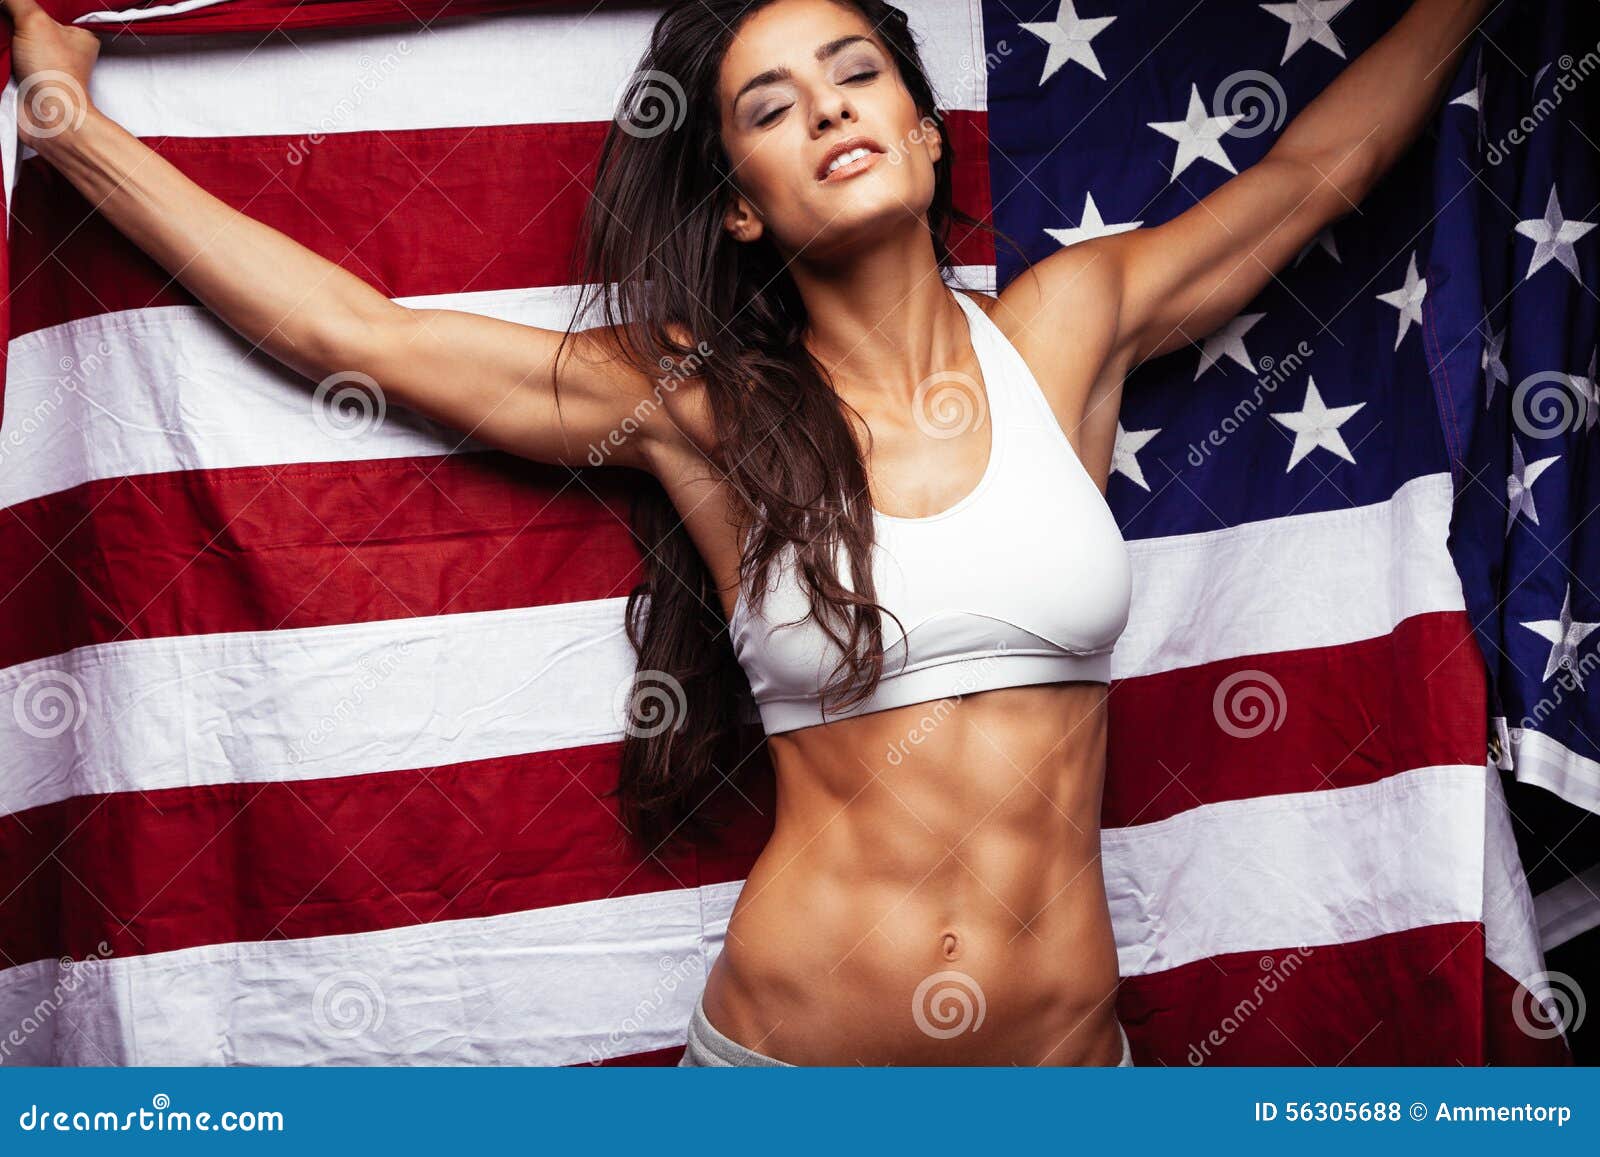 sporty-young-woman-holding-american-flag-fitness-female-perfect-abs-56305688.jpg